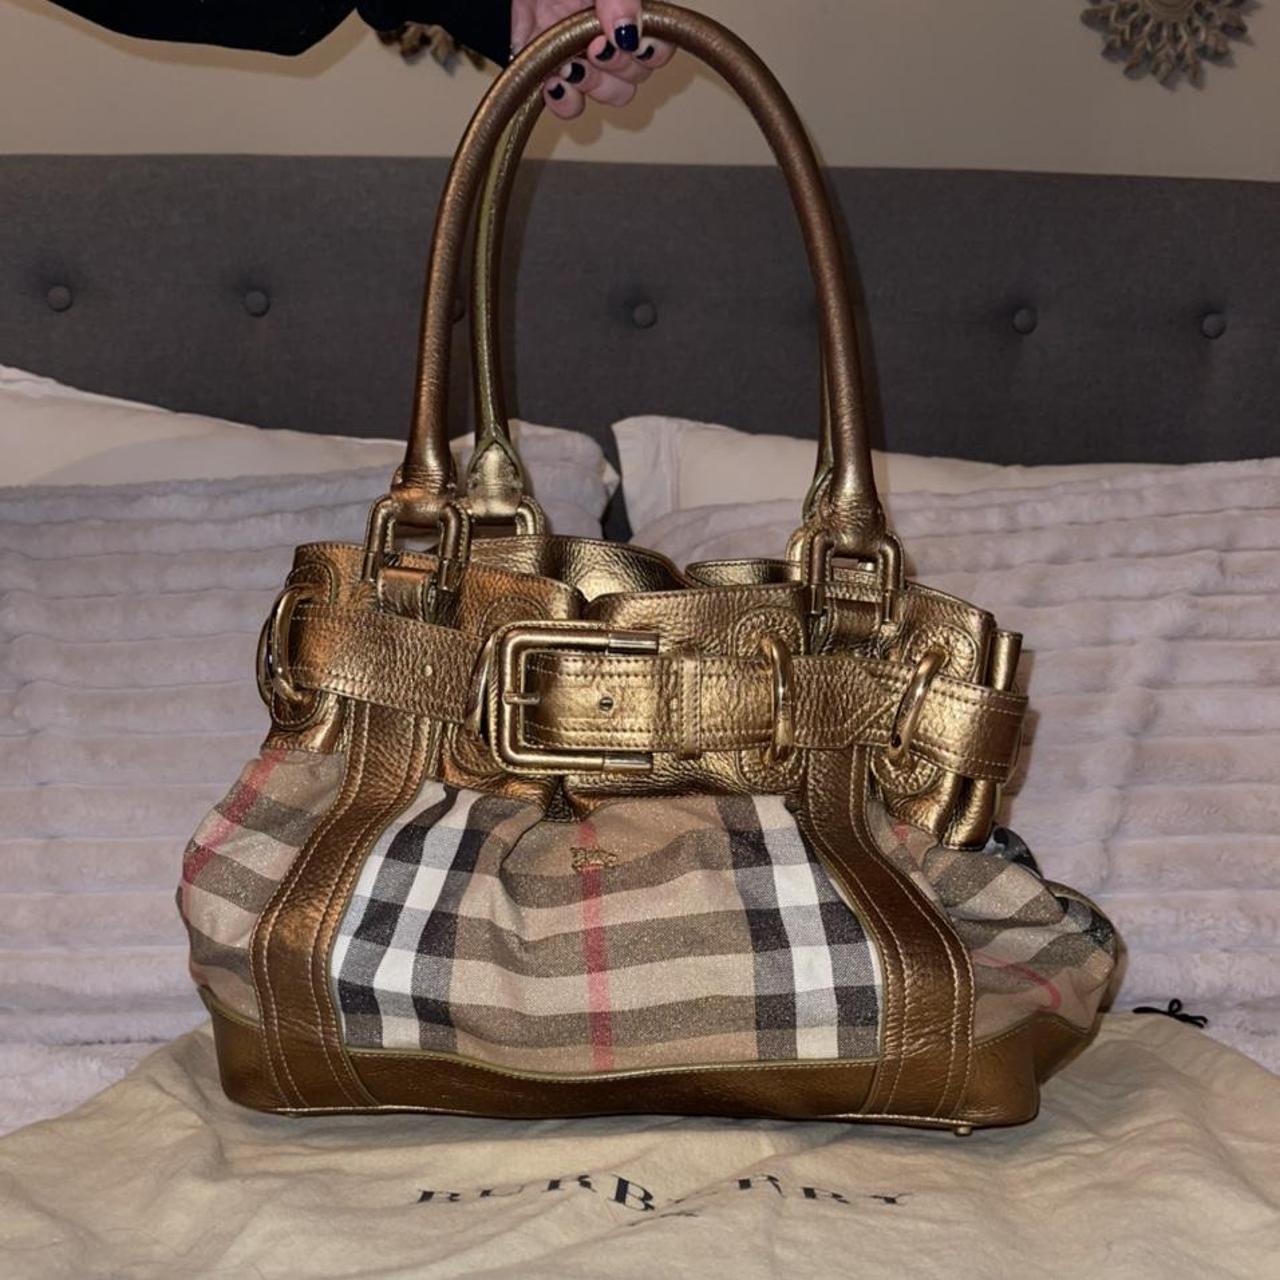 AUTHENTIC BURBERRY PURSE, Medium size , Used, but good